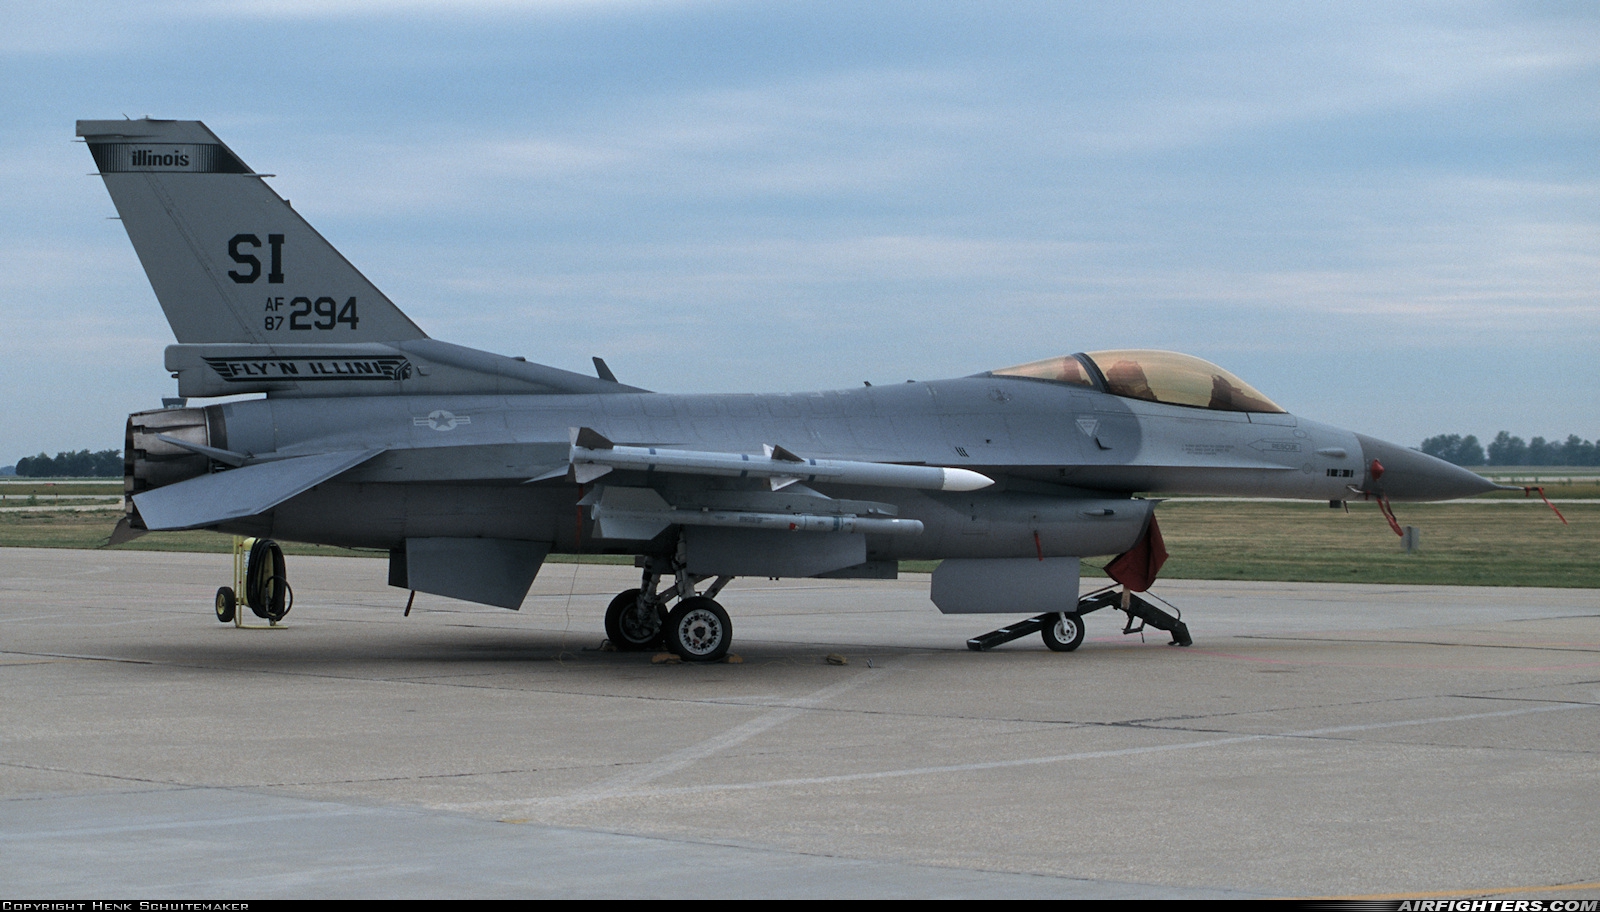 USA - Air Force General Dynamics F-16C Fighting Falcon 87-0294 at Springfield - Abraham Lincoln Capital (SPI / KSPI), USA